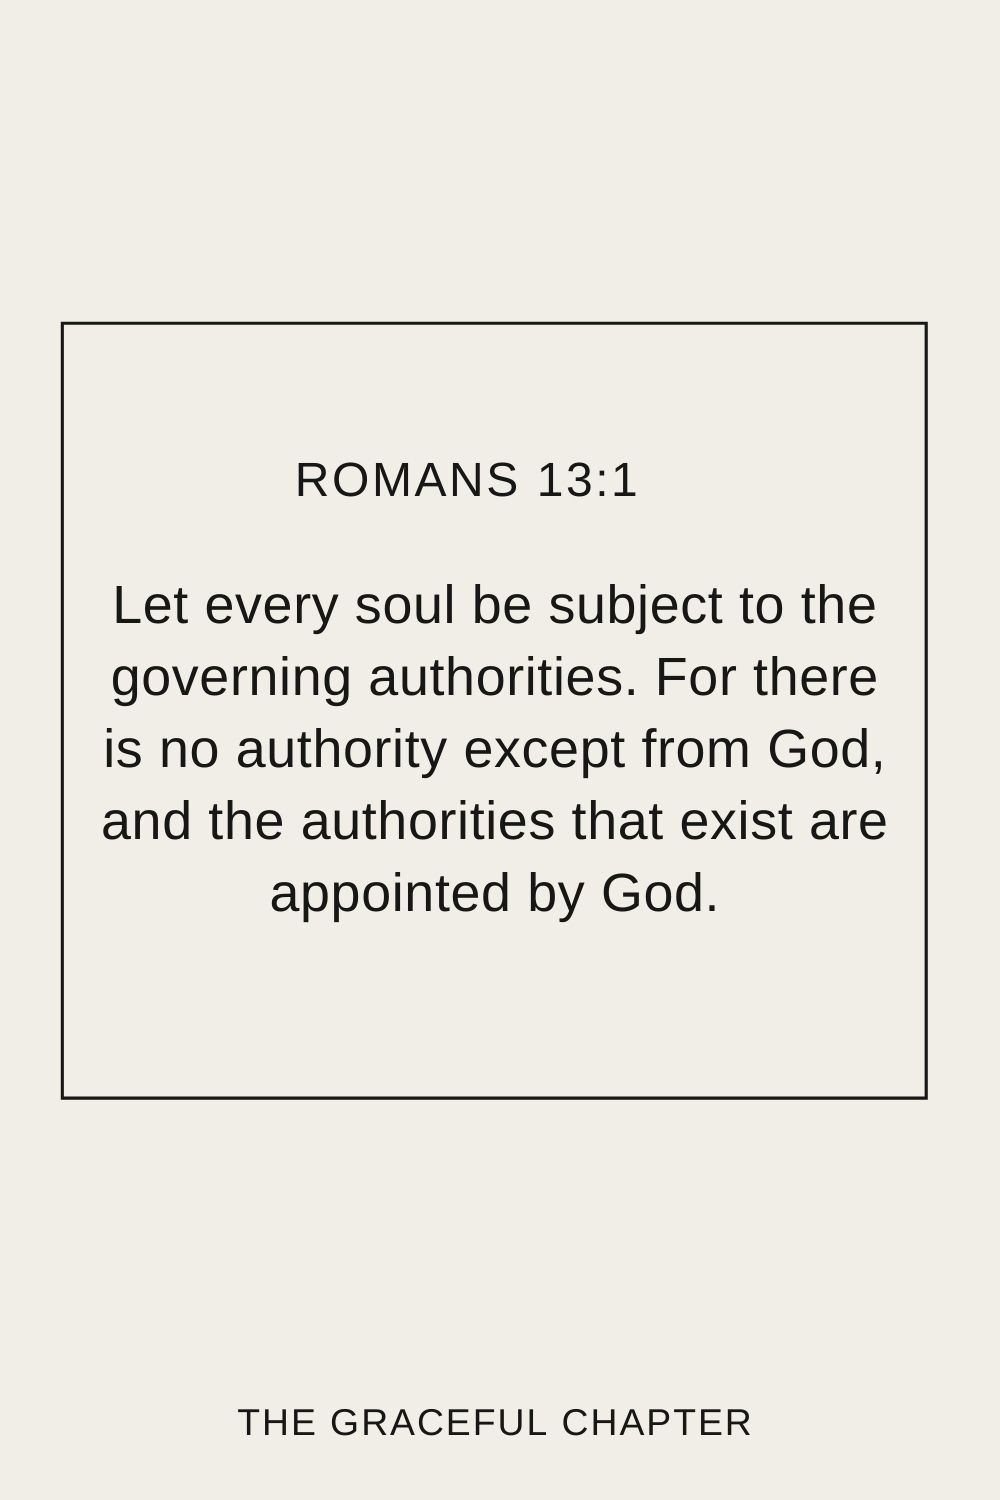 Let every soul be subject to the governing authorities. For there is no authority except from God, and the authorities that exist are appointed by God. Romans 13:1